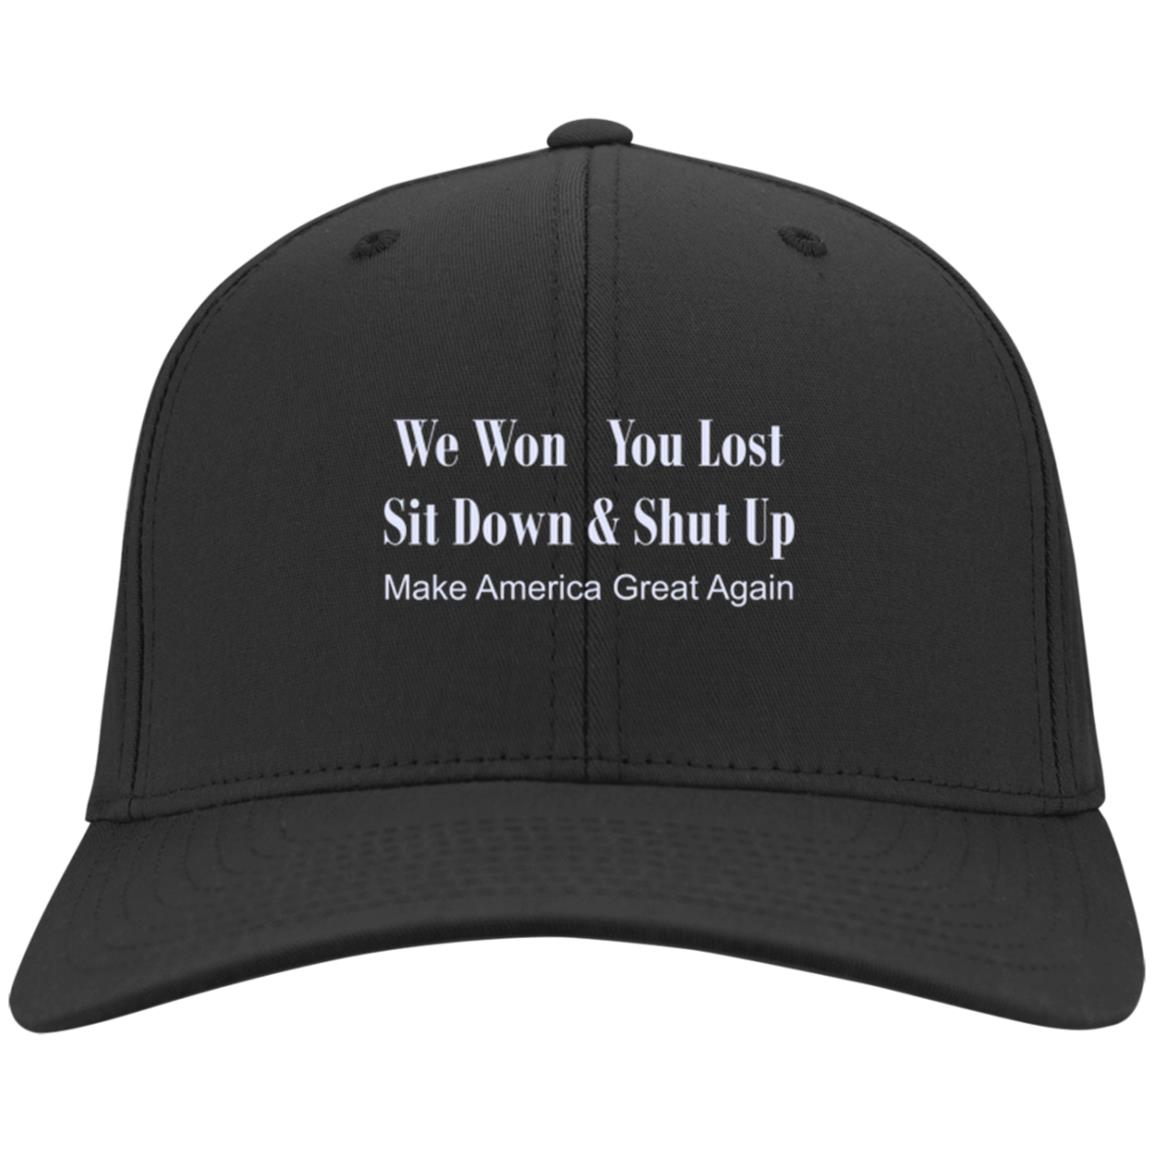 We Won You Lost Sit Down And Shut Up Hats | Allbluetees.com